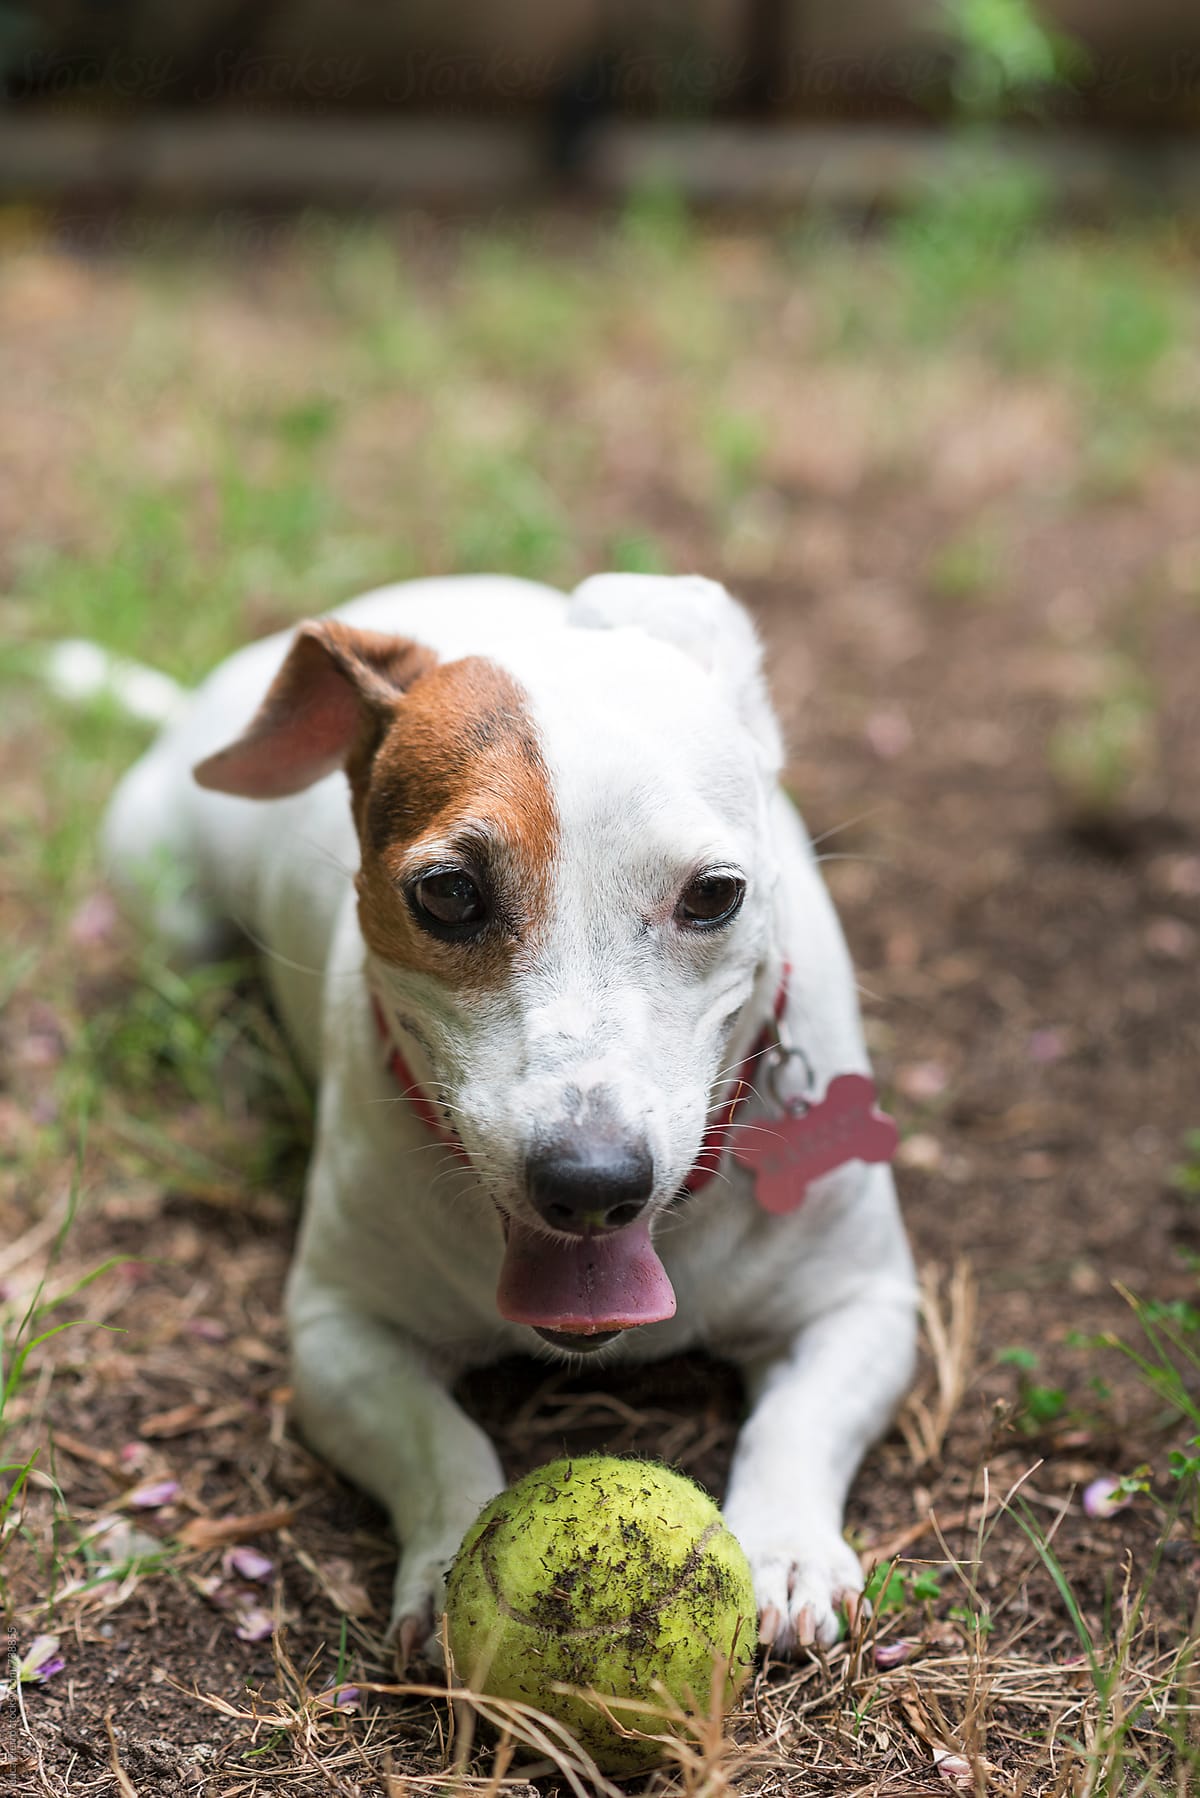 Jack Russel Terrier dog playing with a tennis ball